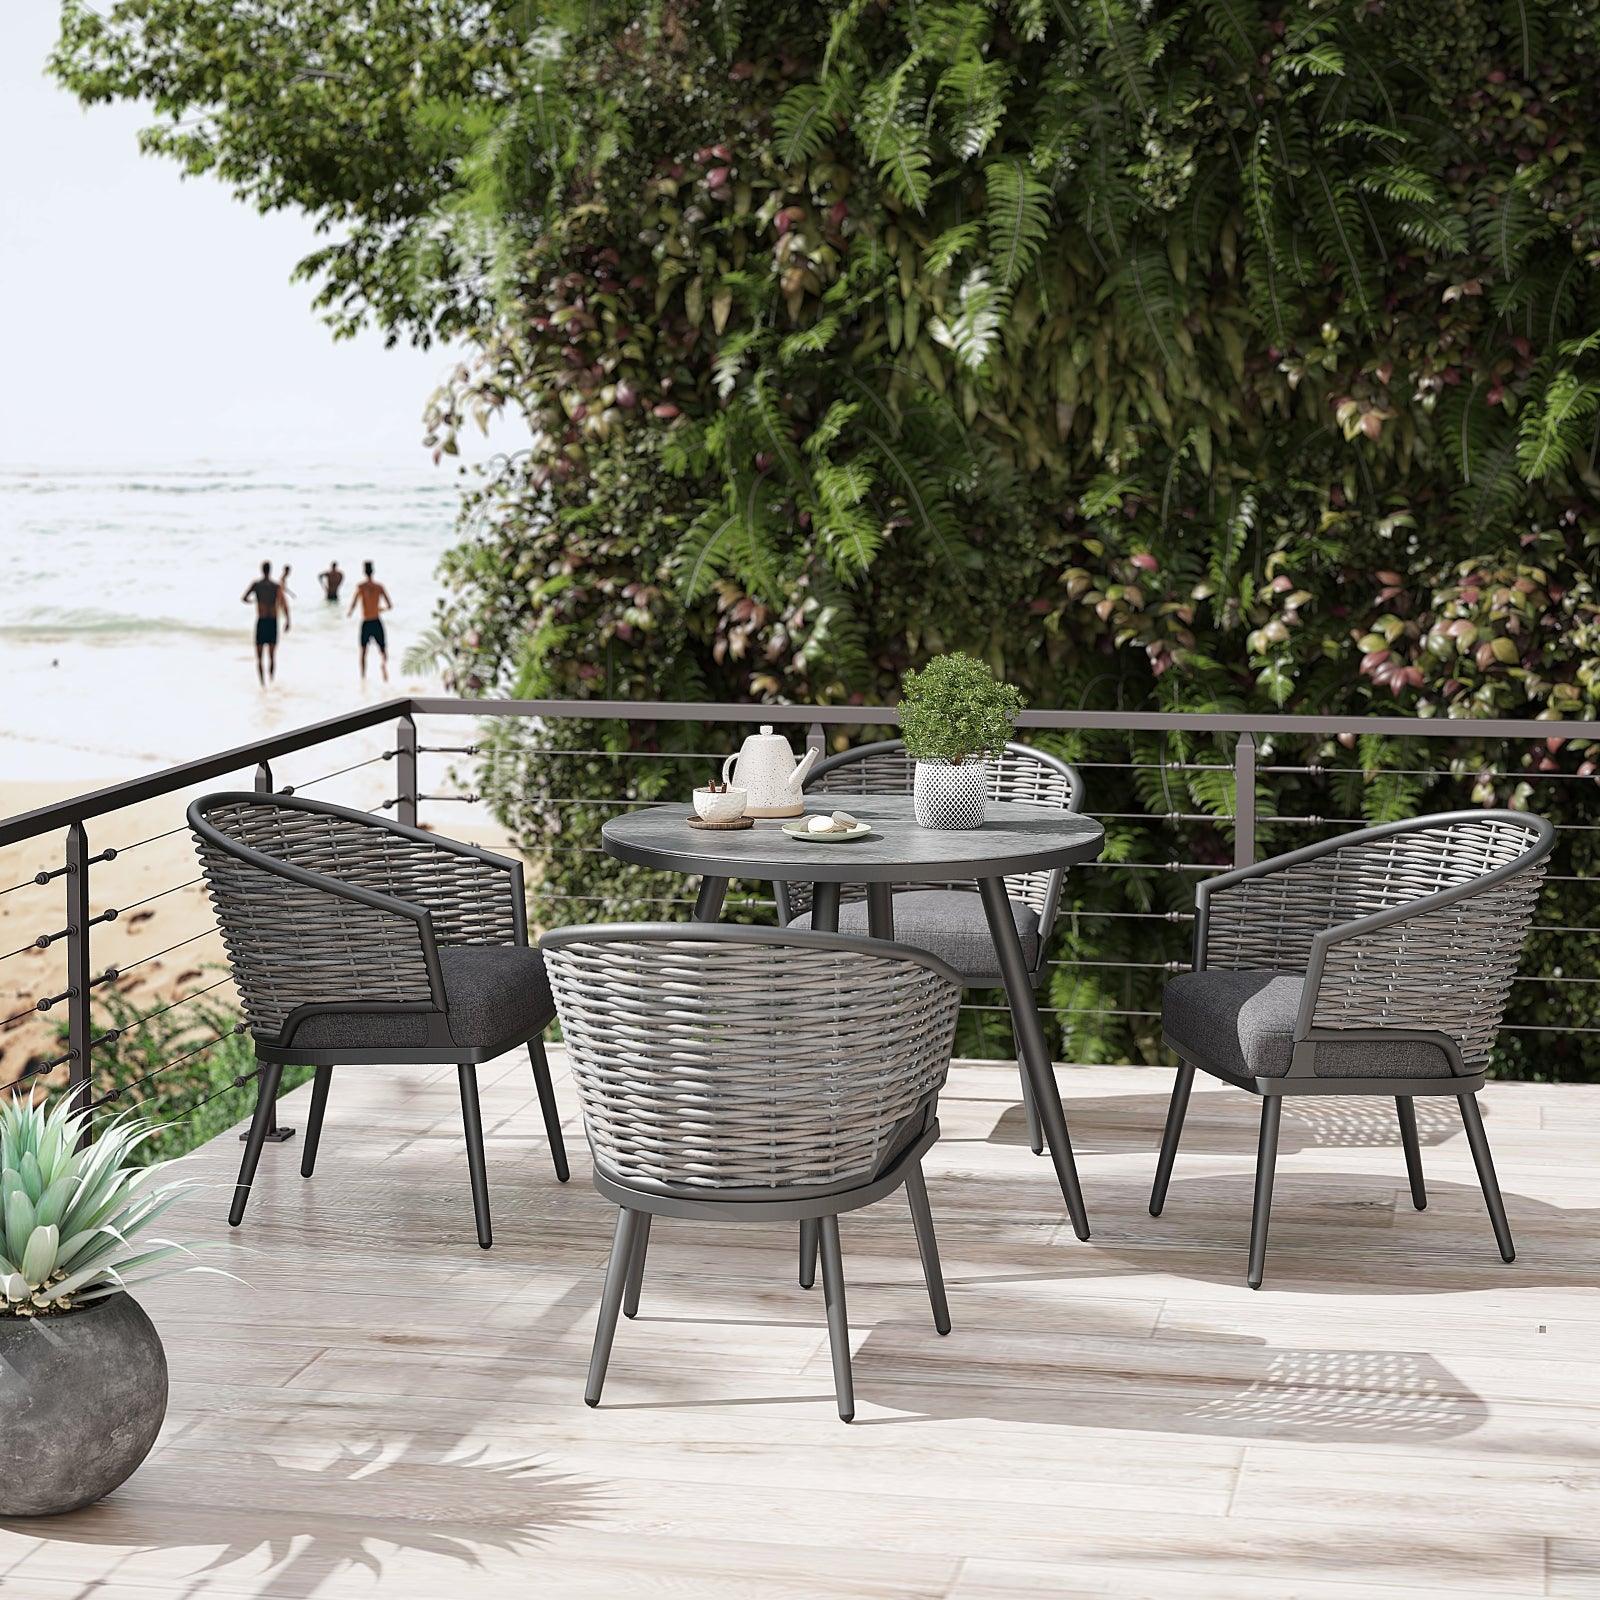 Burano Grey wicker outdoor Dining chairs with aluminum frame, grey cushions, 4 chairs,1 round table-Jardina Furniture